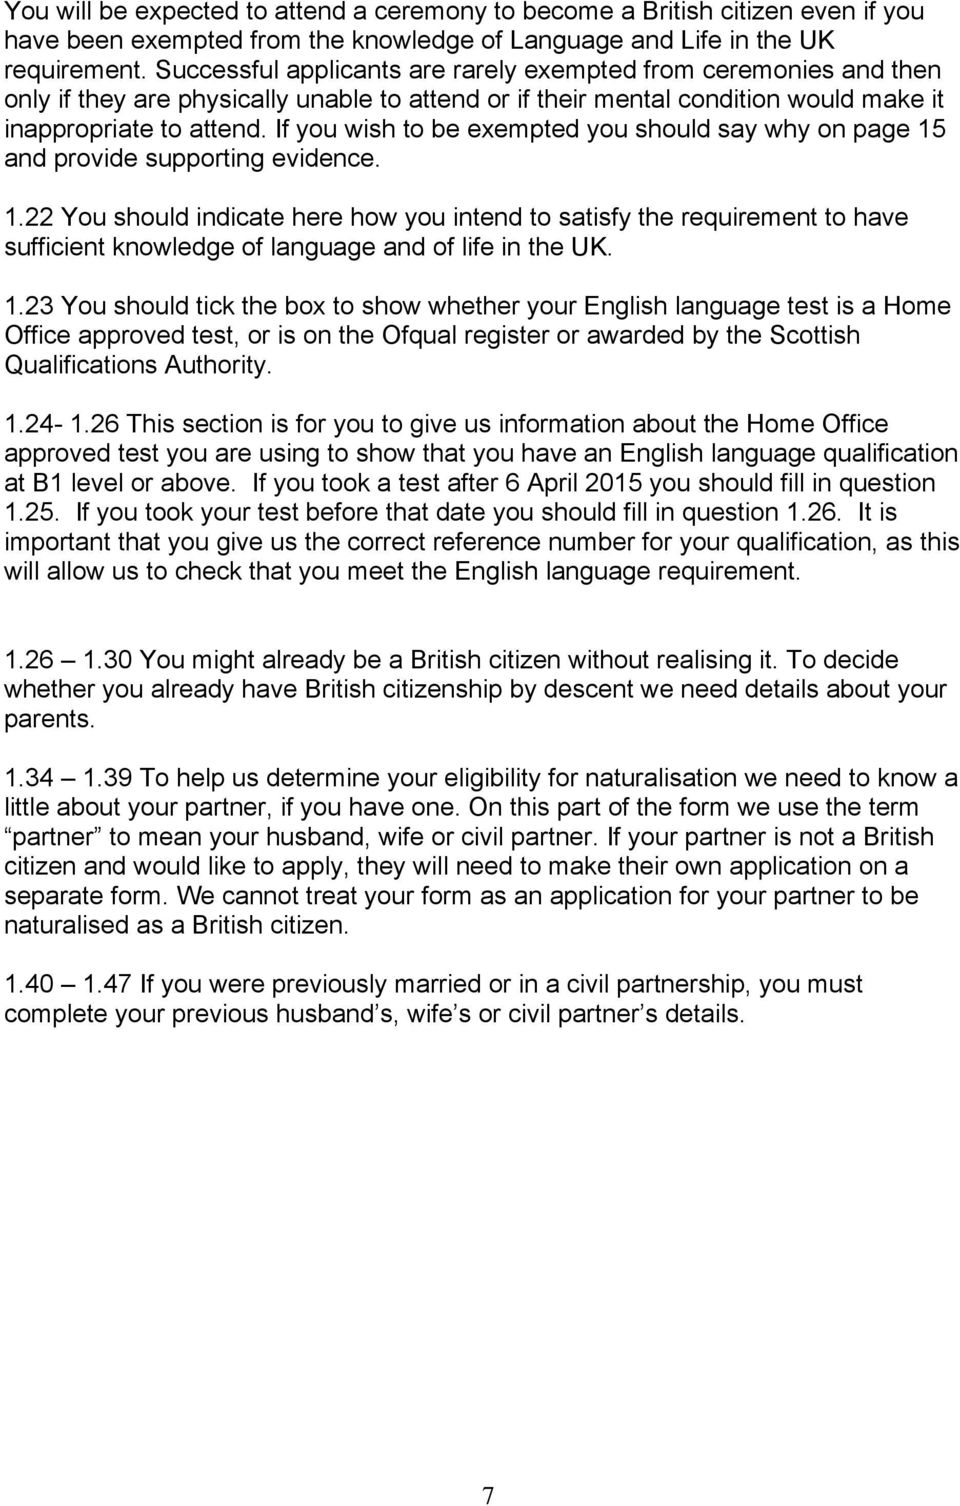 If you wish to be exempted you should say why on page 15 and provide supporting evidence. 1.22 You should indicate here how you intend to satisfy the requirement to have sufficient knowledge of language and of life in the UK.